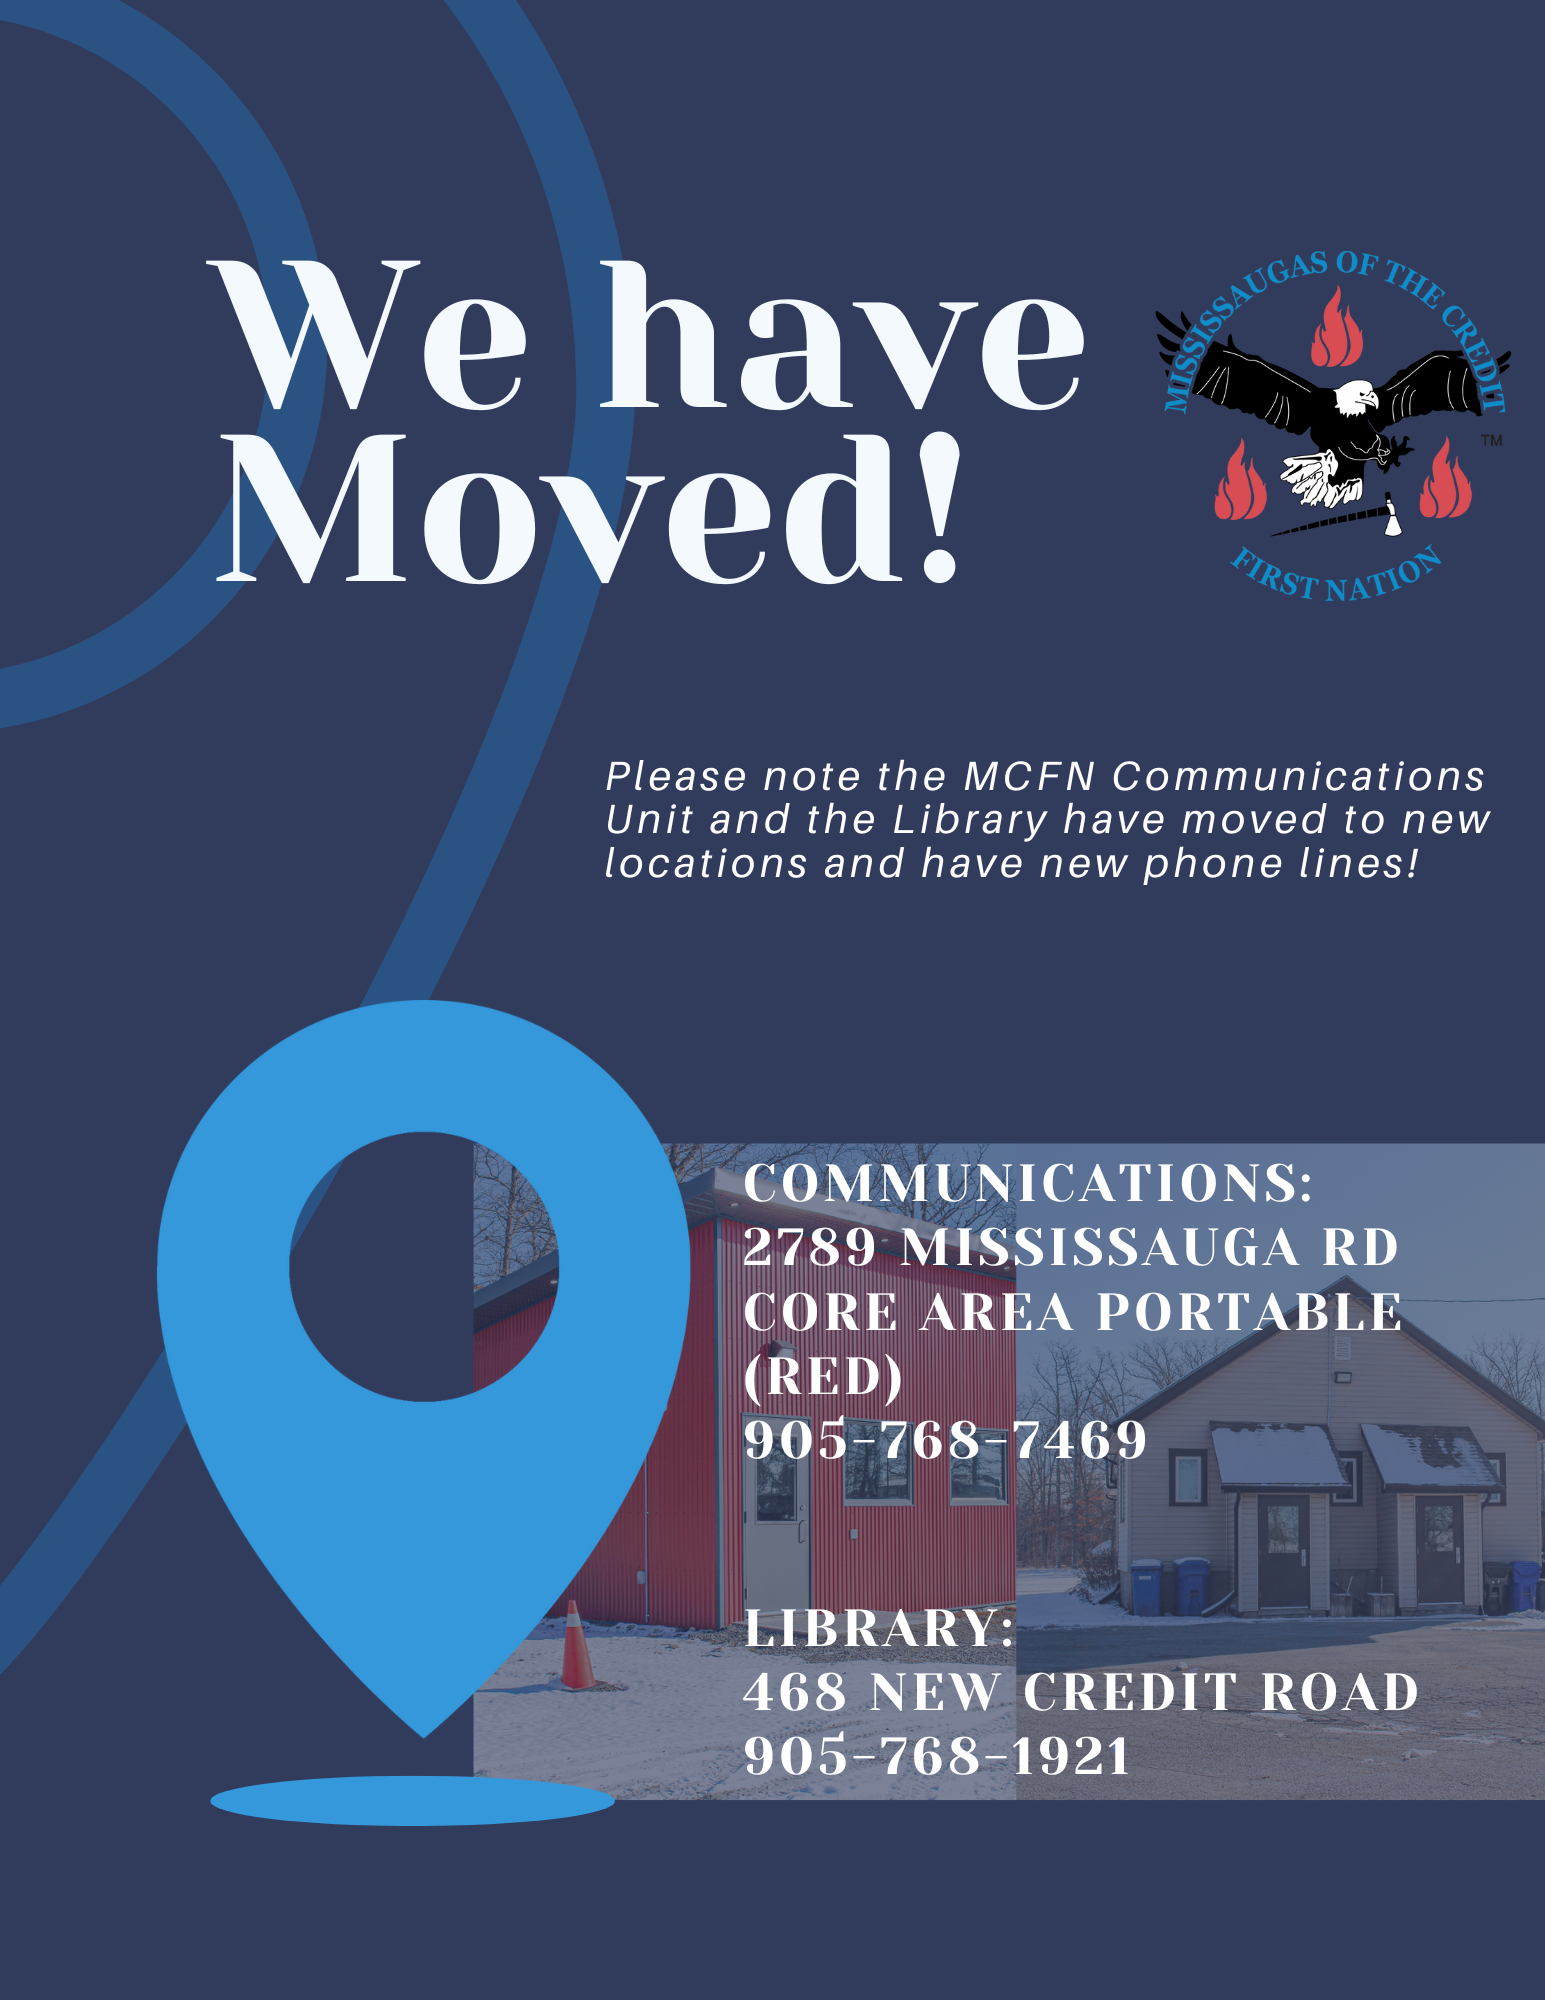 New address / phones for Communications and Library